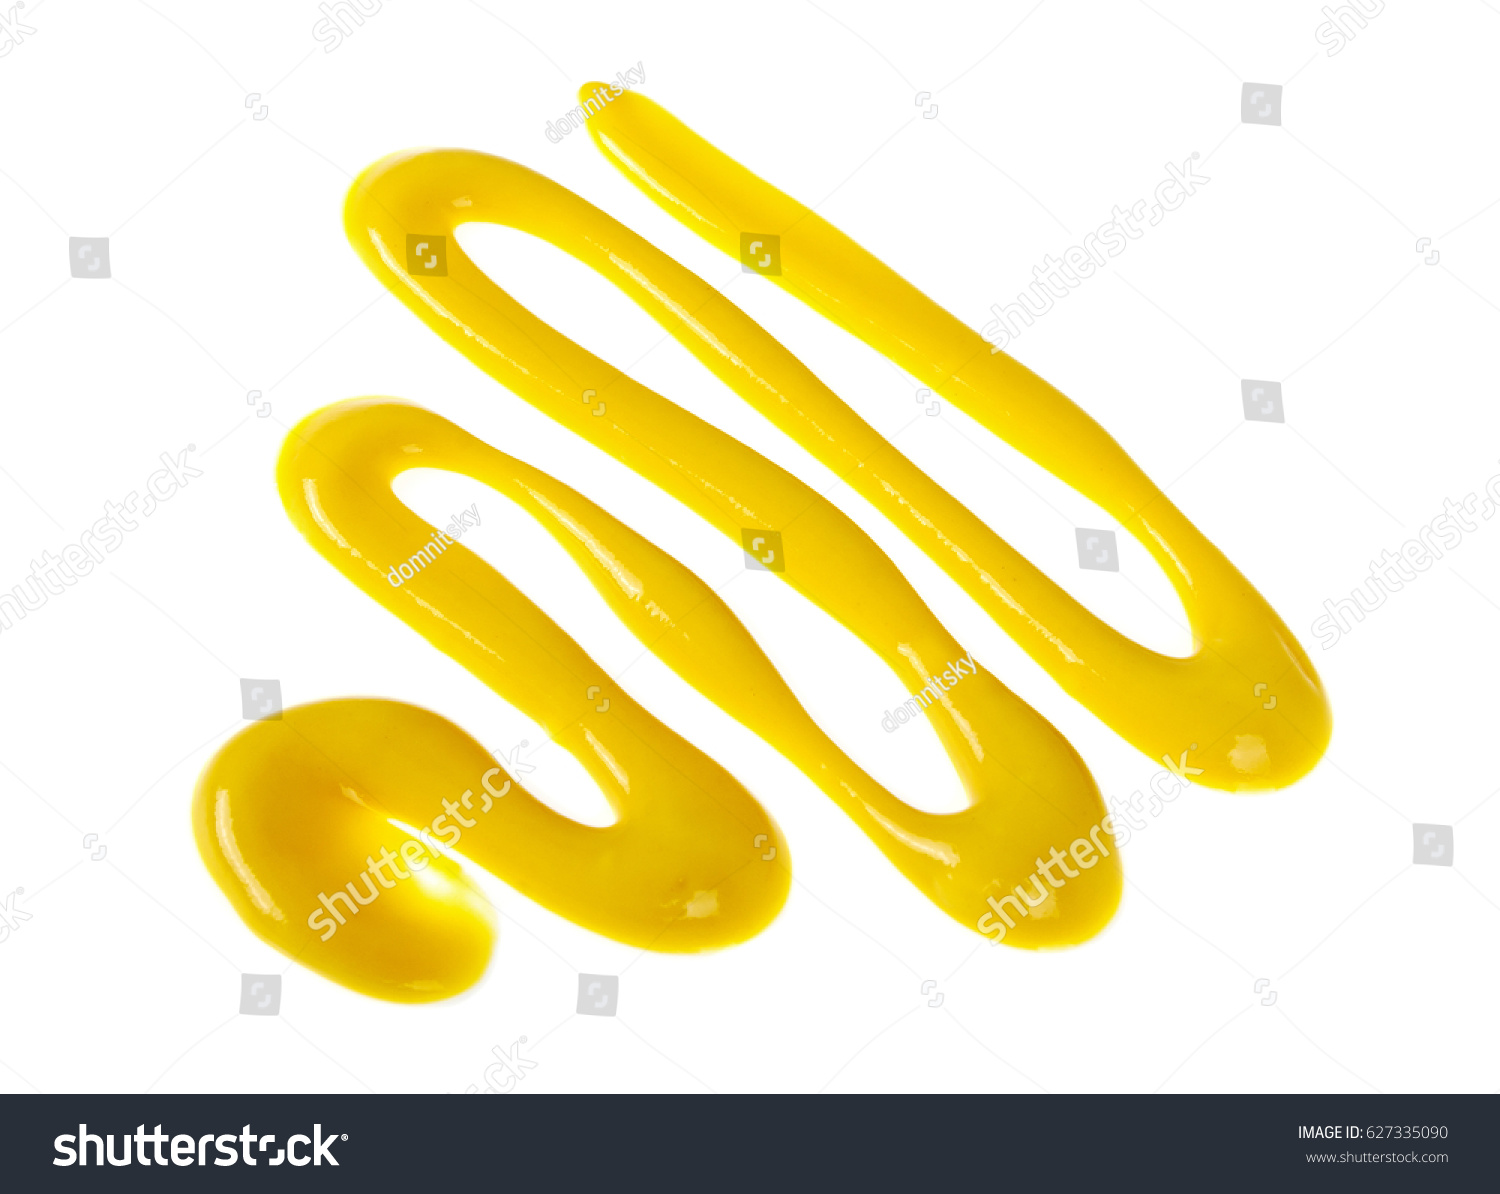 Mustard sauce on a white background #627335090